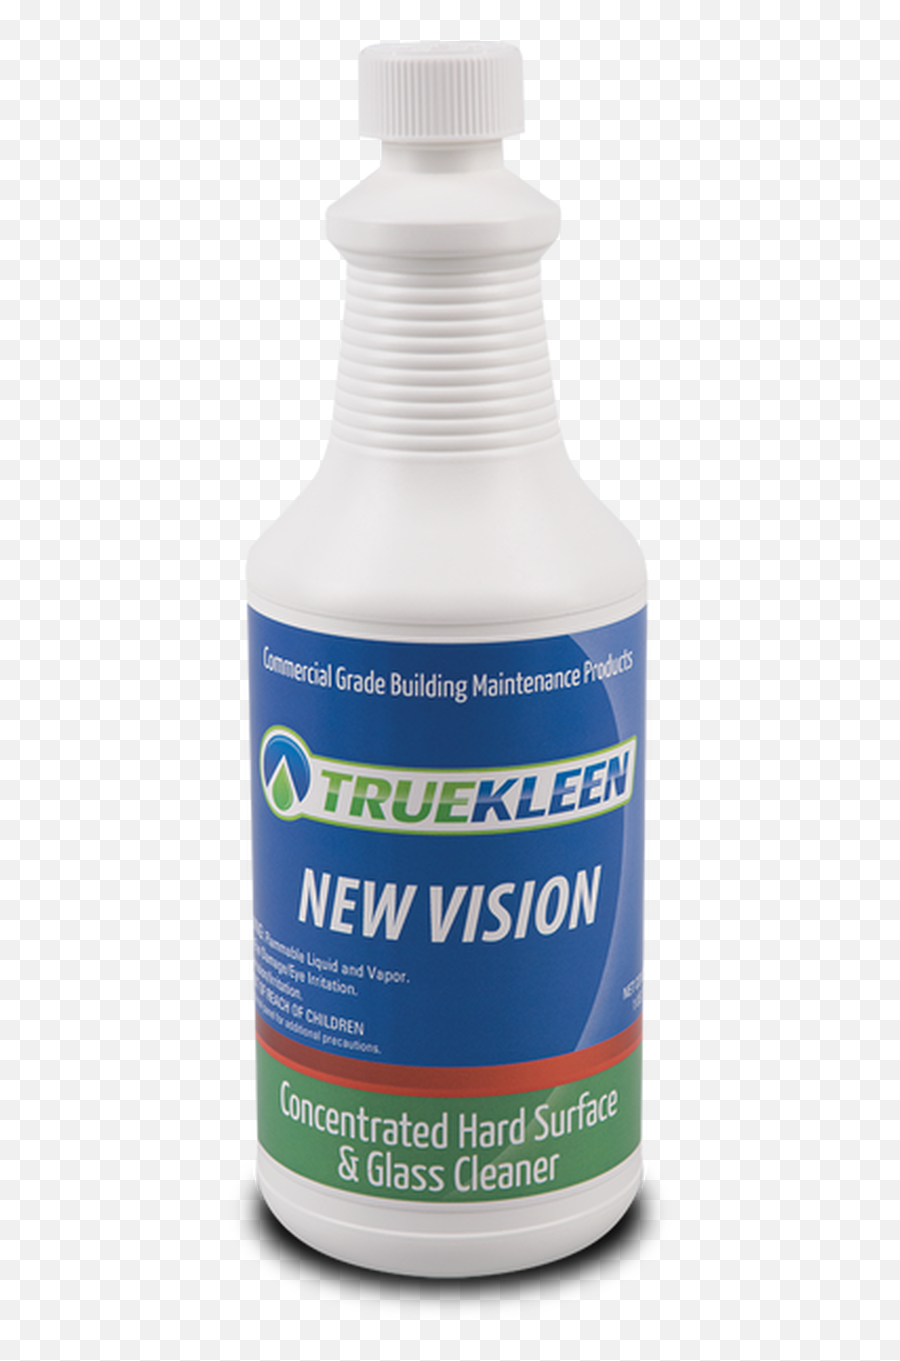 Truekleen New Vision Concentrated Glass Cleaner Emoji,Windex Png